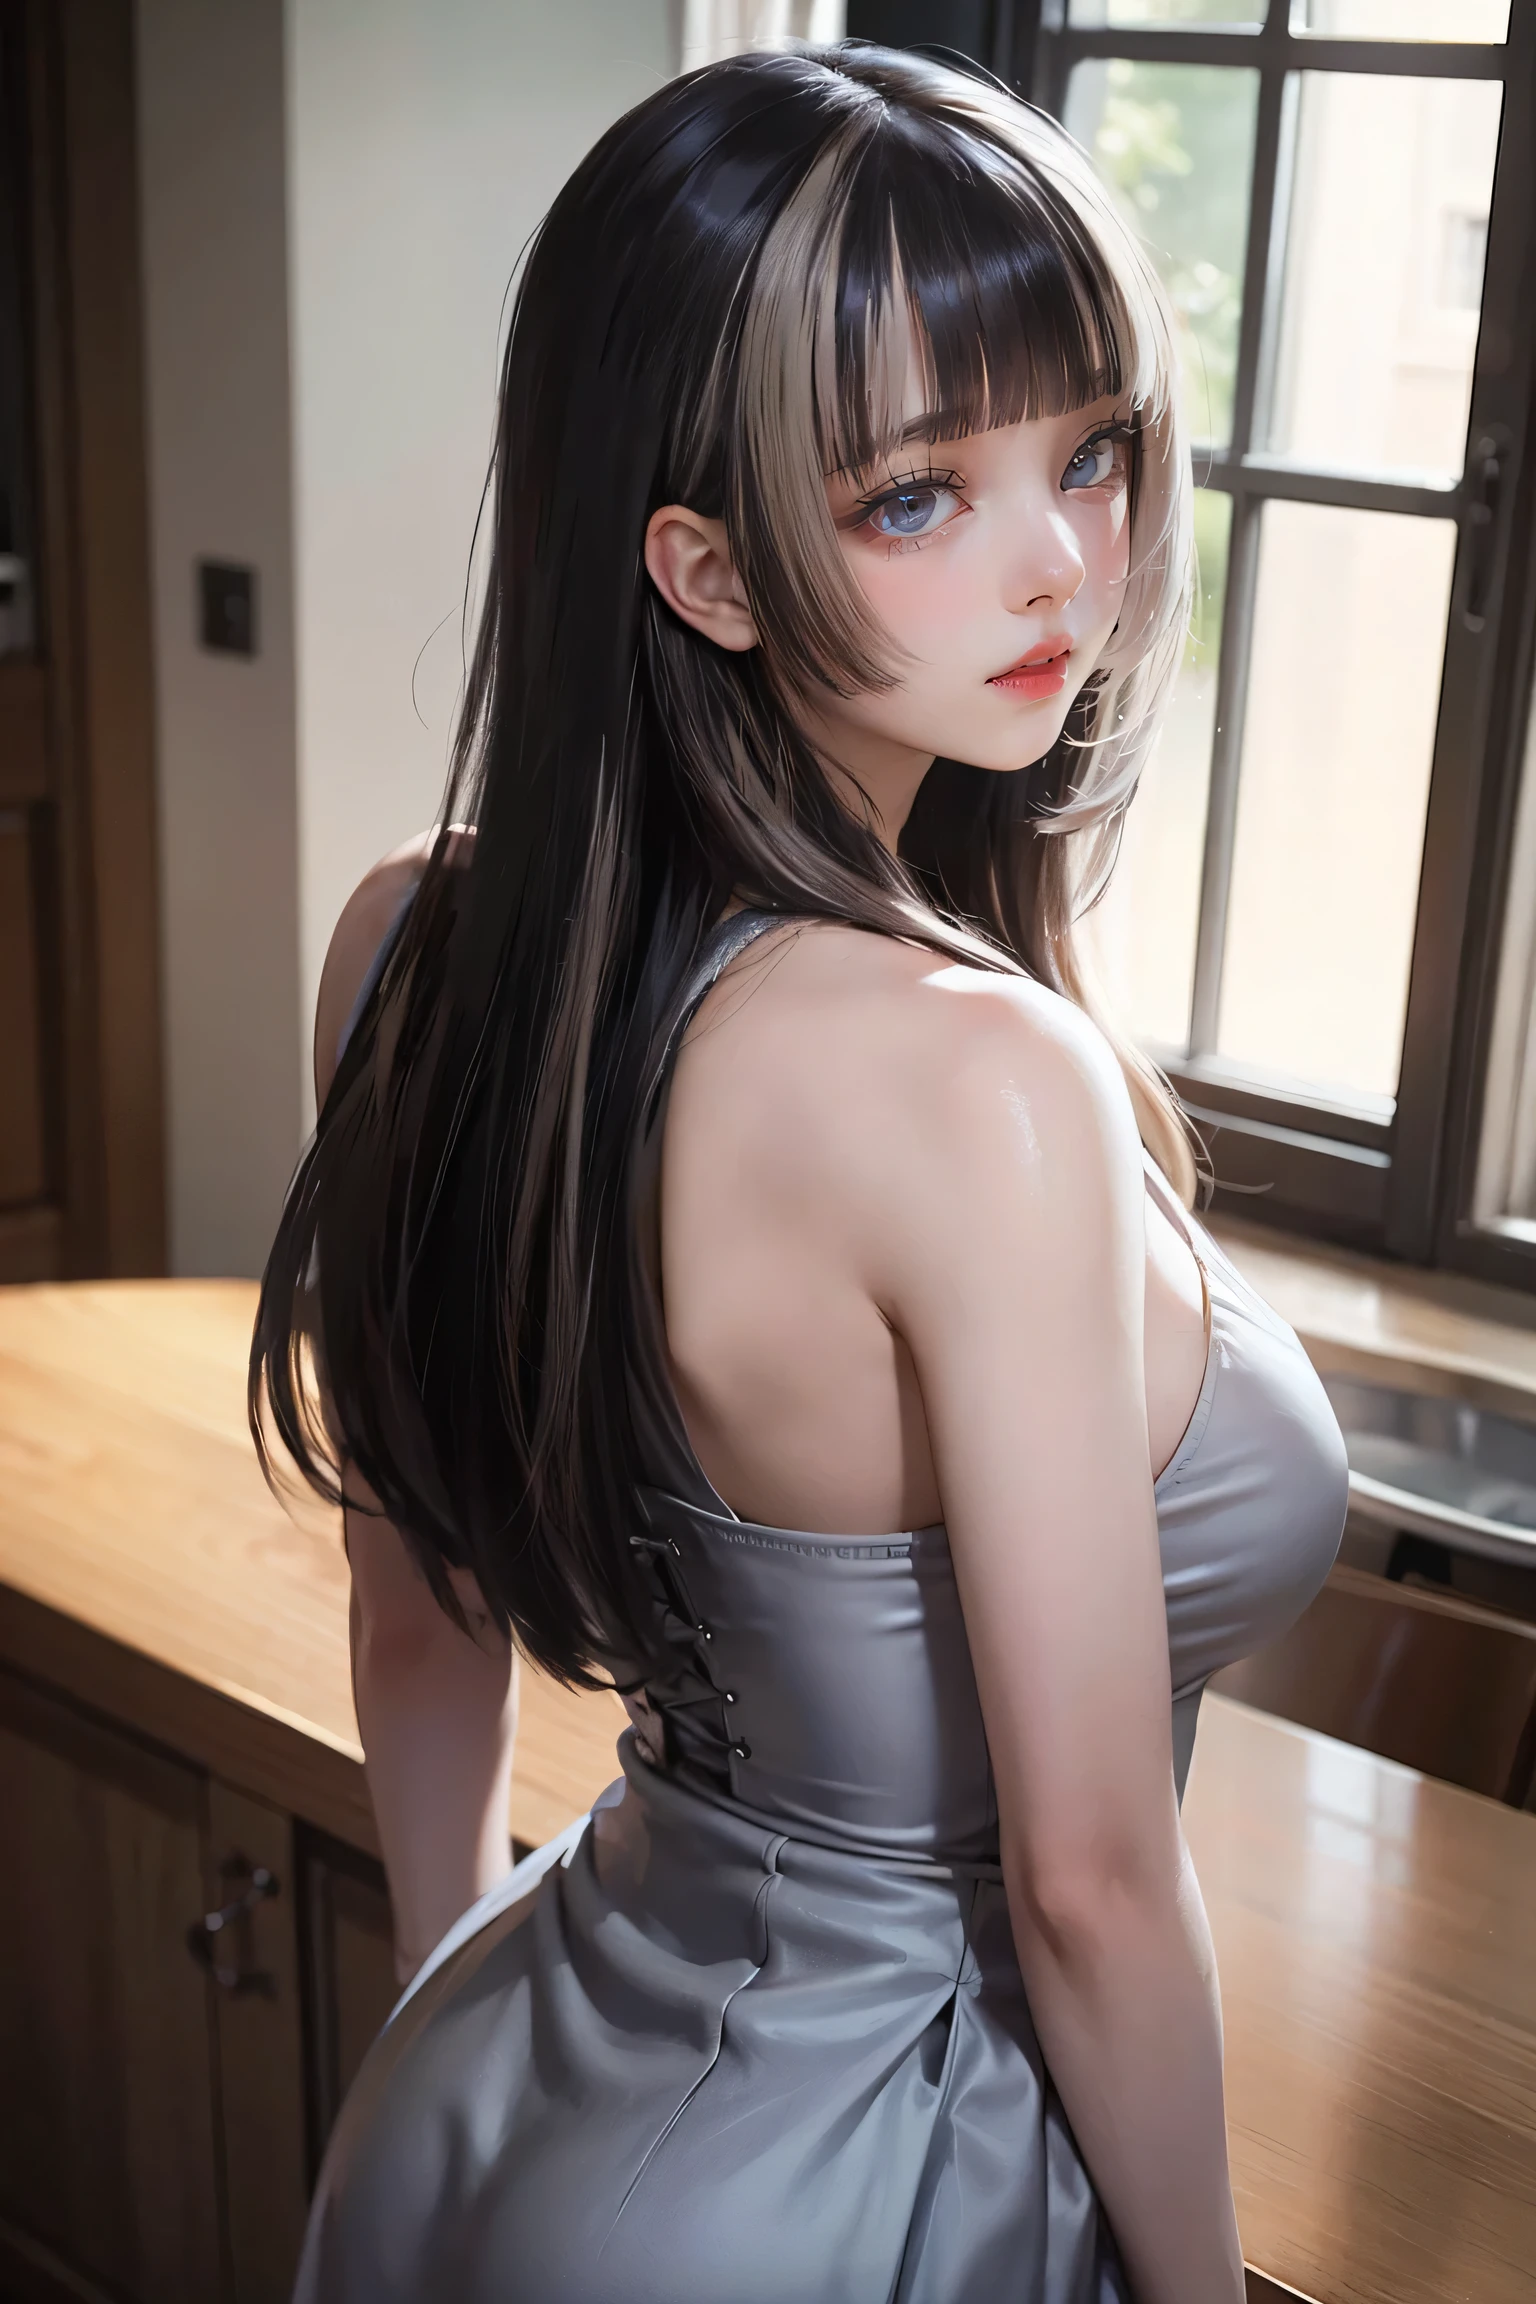 View from behind、(Realistic painting style:0.9), Tabletop, One Girl, alone, chest, Long Hair, Black see-through dress, Grey Hair, Chest cleavage, View your viewers, smile, Mouth closed, bangs, Grey Eyes, Big Breasts, Expose your shoulders, Large chest, Sexy pose、View from behind，Sexy Style